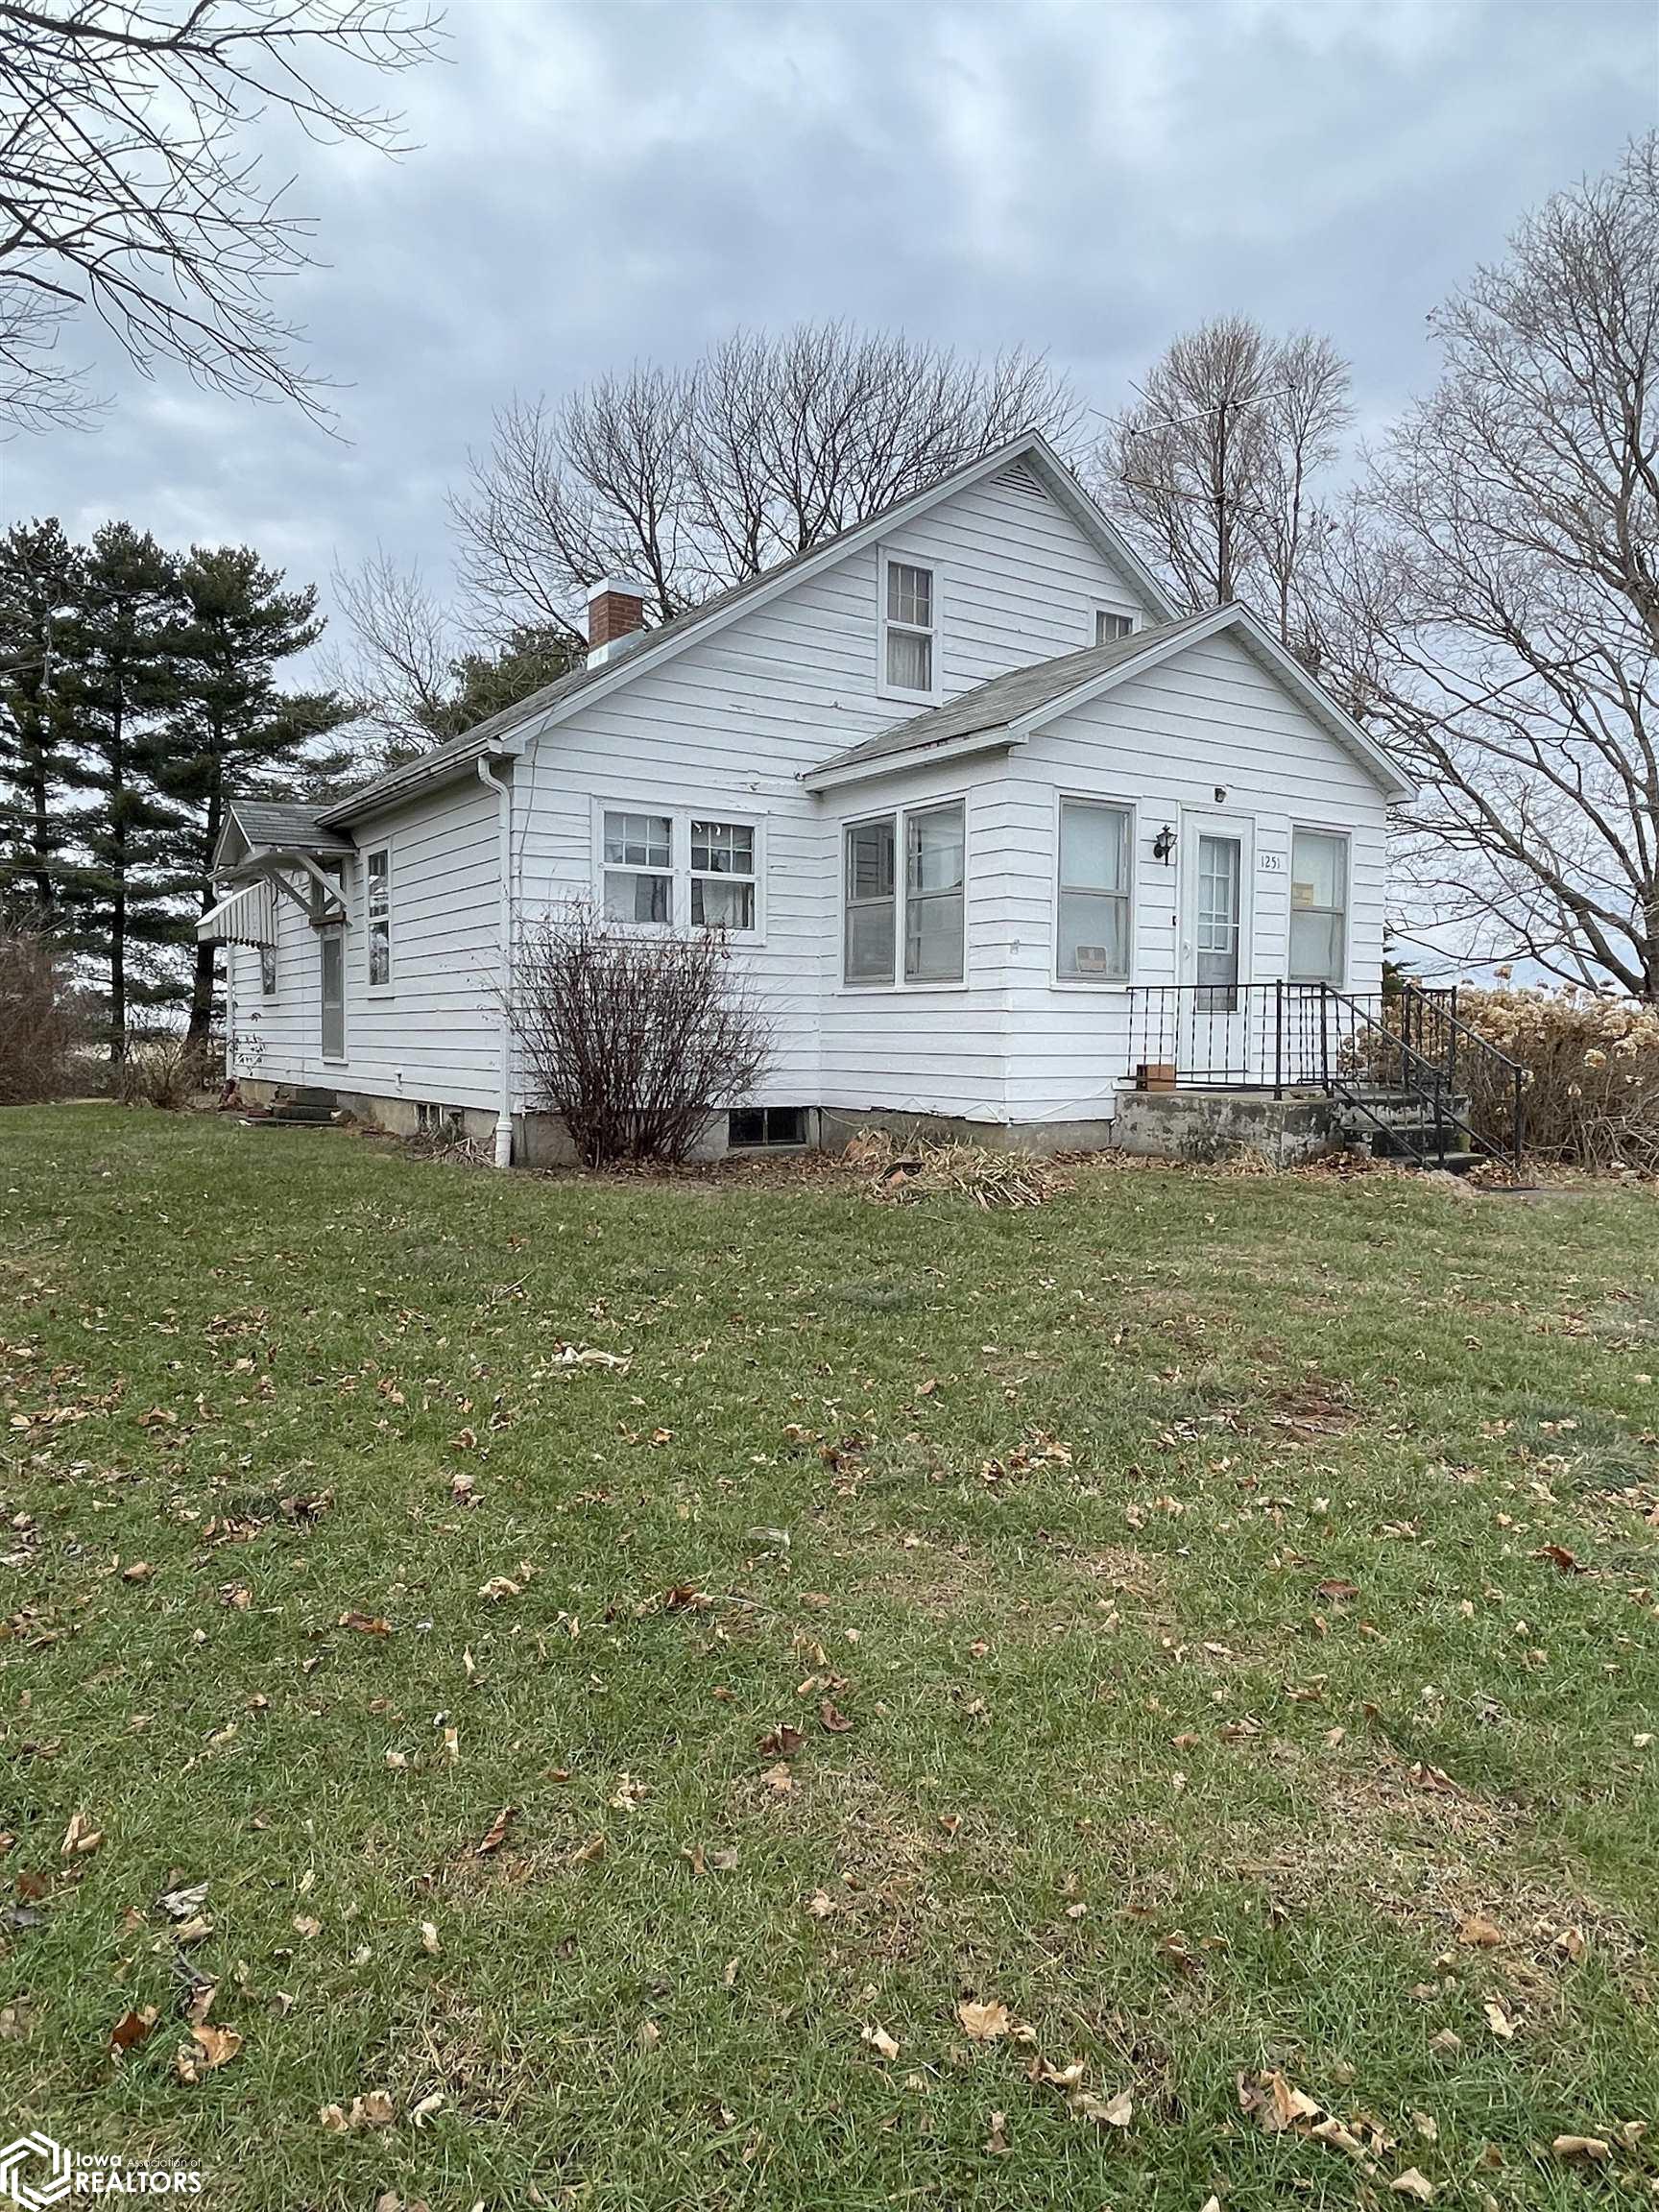 1251 County Rd 2500, Niota, Illinois 62358, 3 Bedrooms Bedrooms, ,1 BathroomBathrooms,Single Family,For Sale,County Rd 2500,6305179